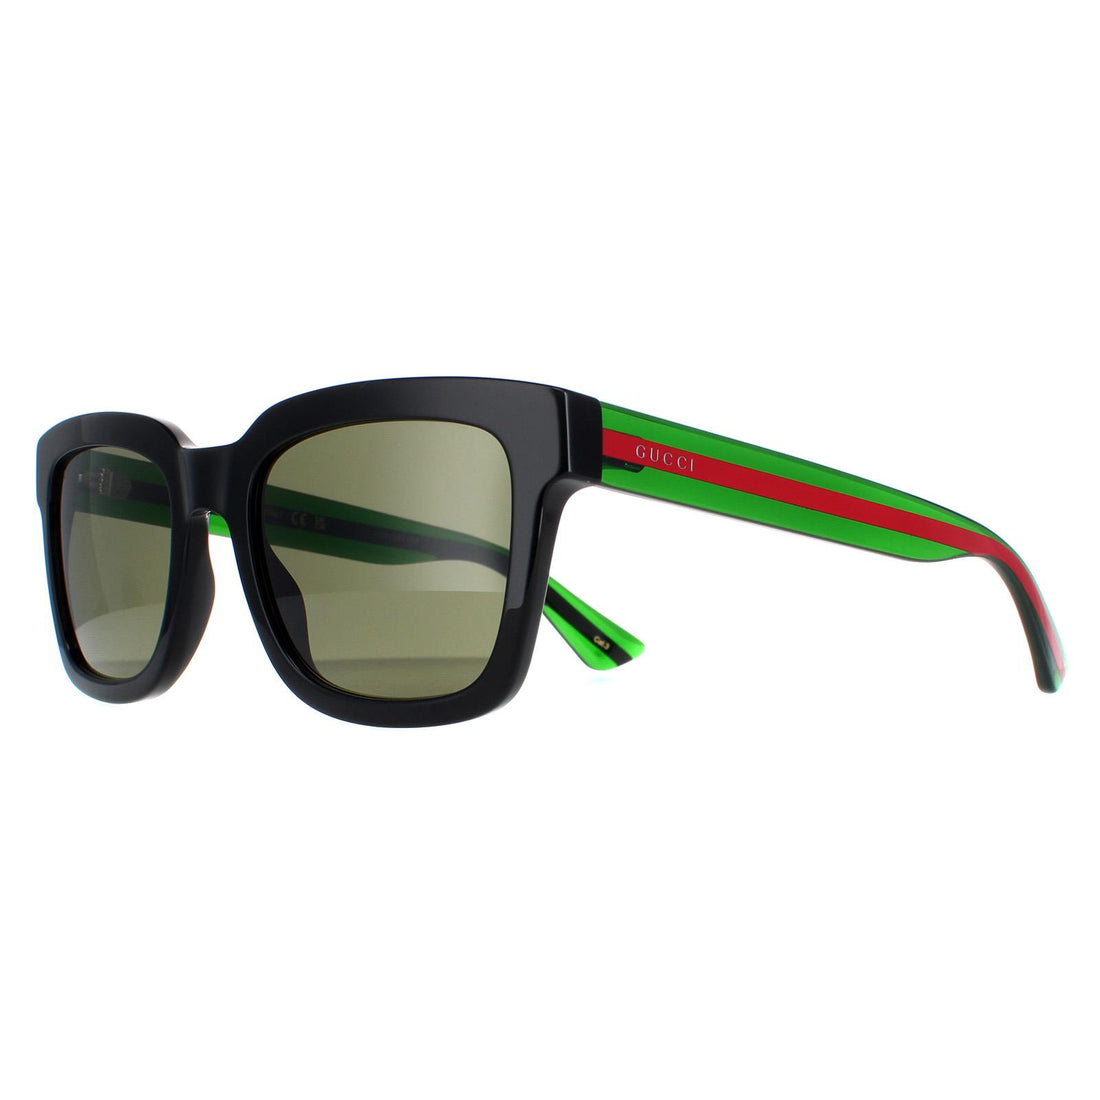 Gucci Sunglasses GG0001SN 002 Black and Green With Red Stripe Green